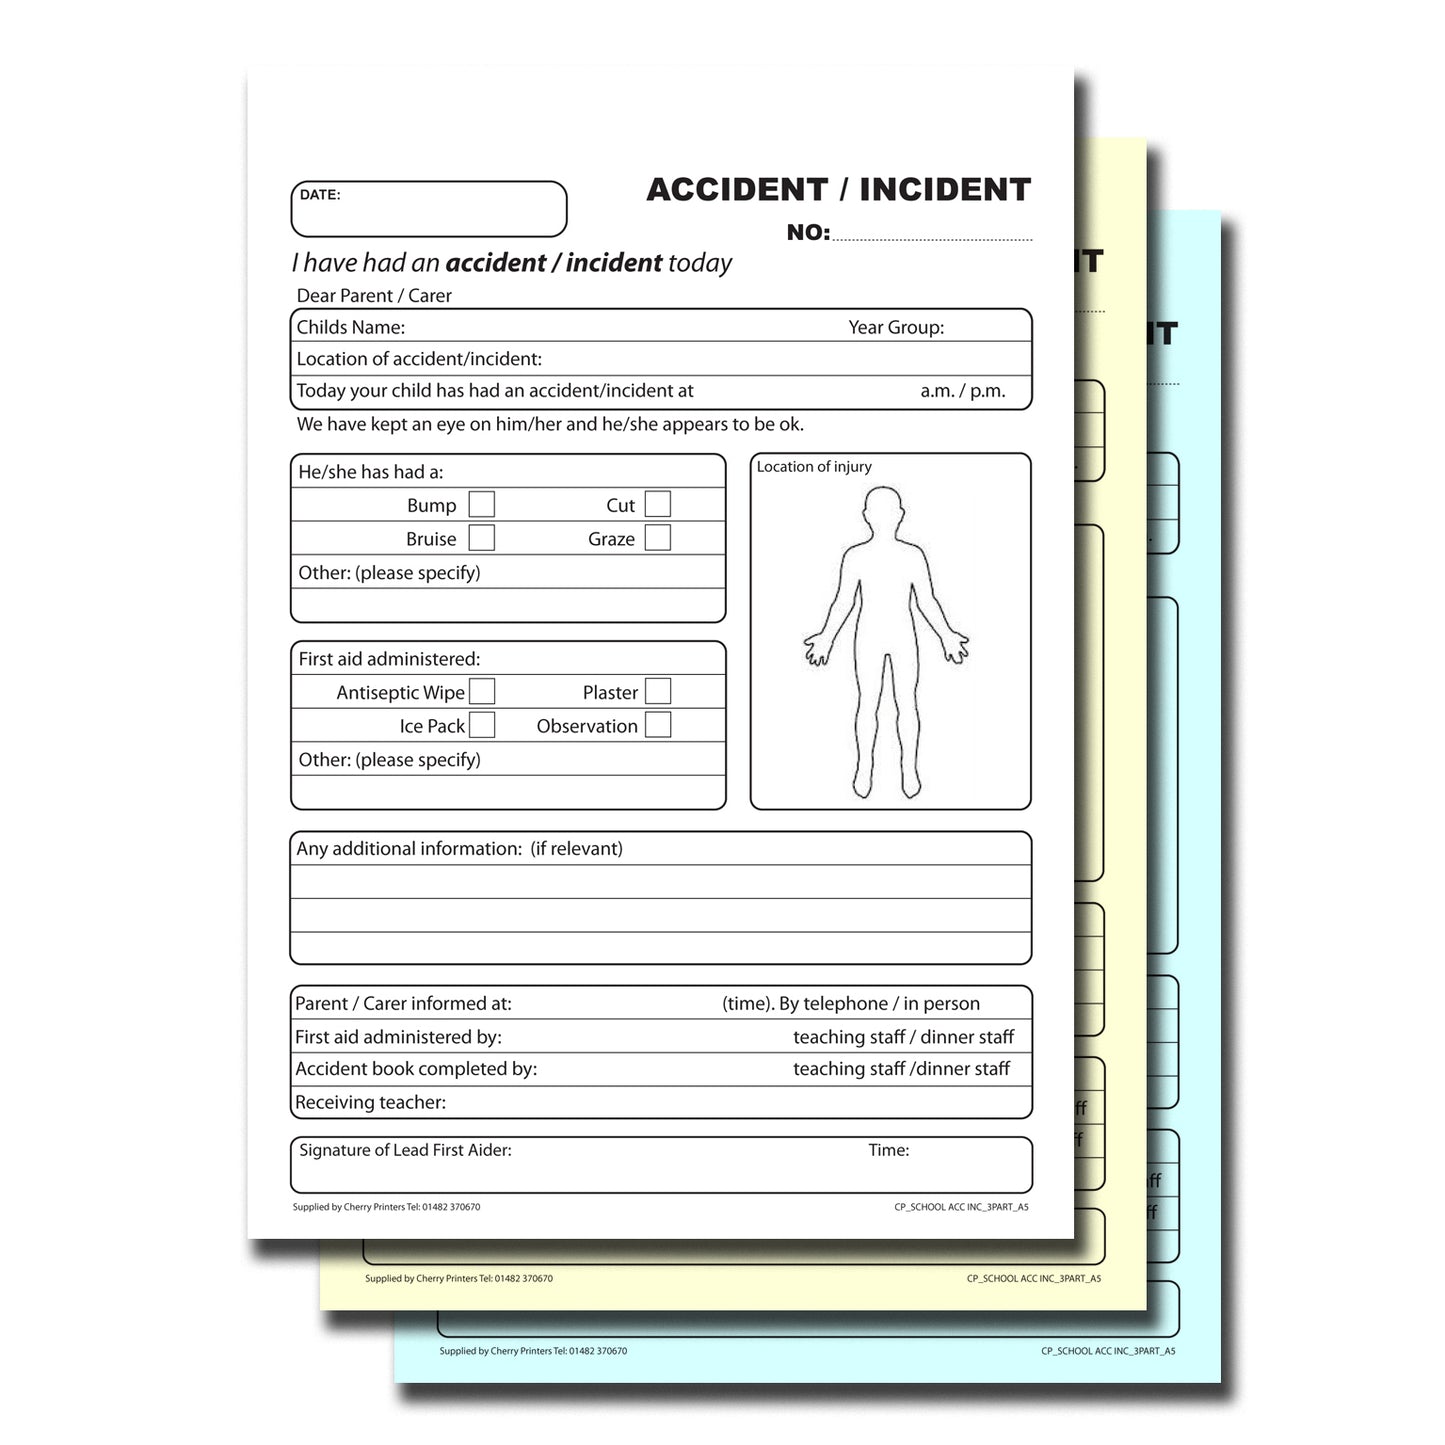 NCR School Accident /Incident Report Book A5 Triplicate